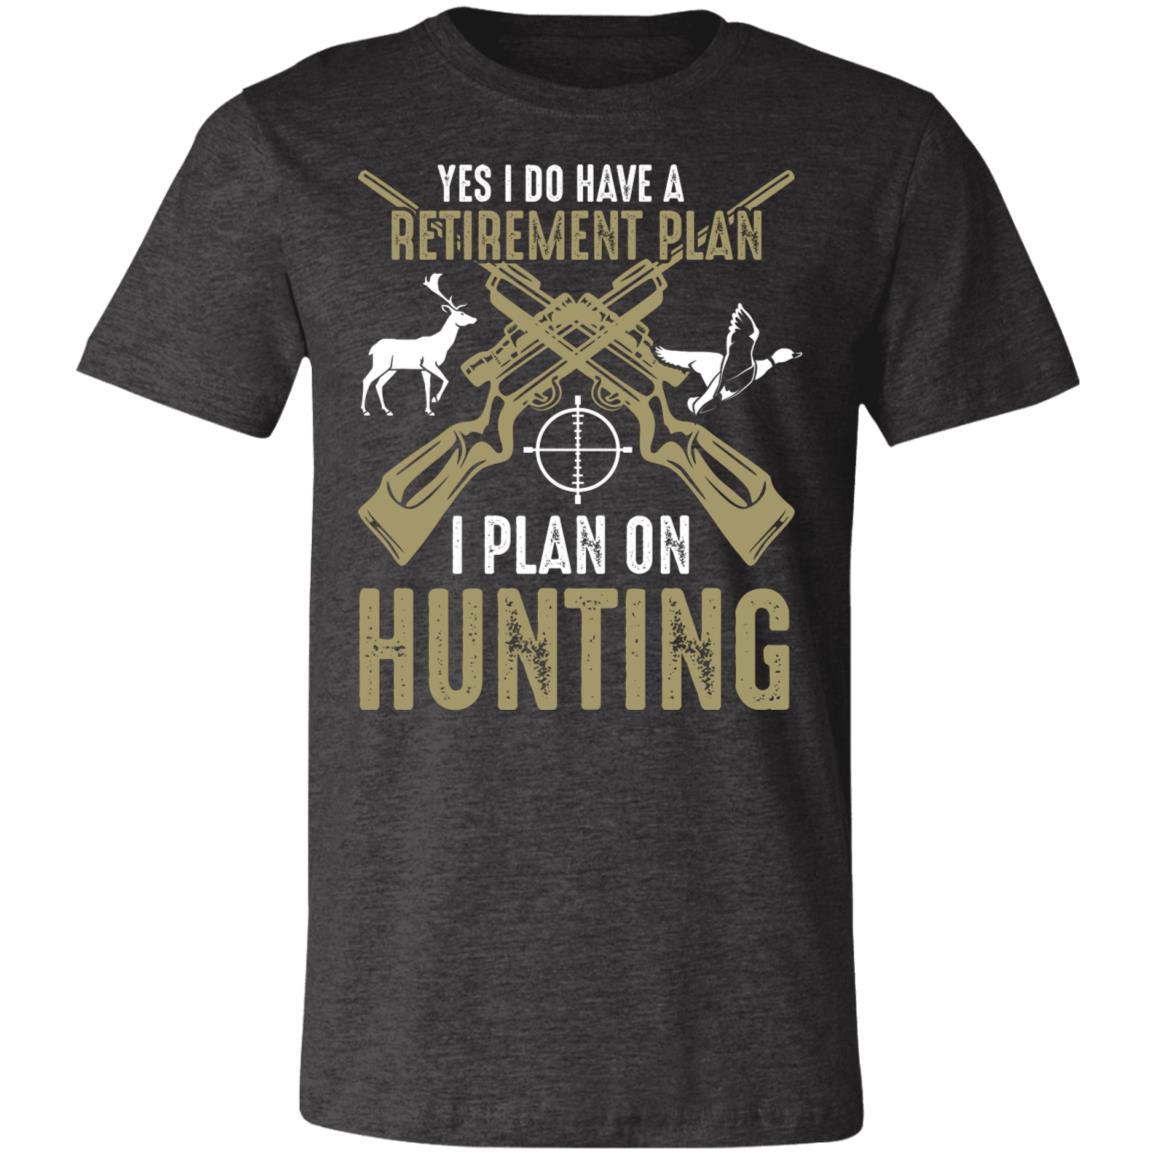 Retirement Plan is Hunting Hunter Gift T-Shirt-Express Your Love Gifts